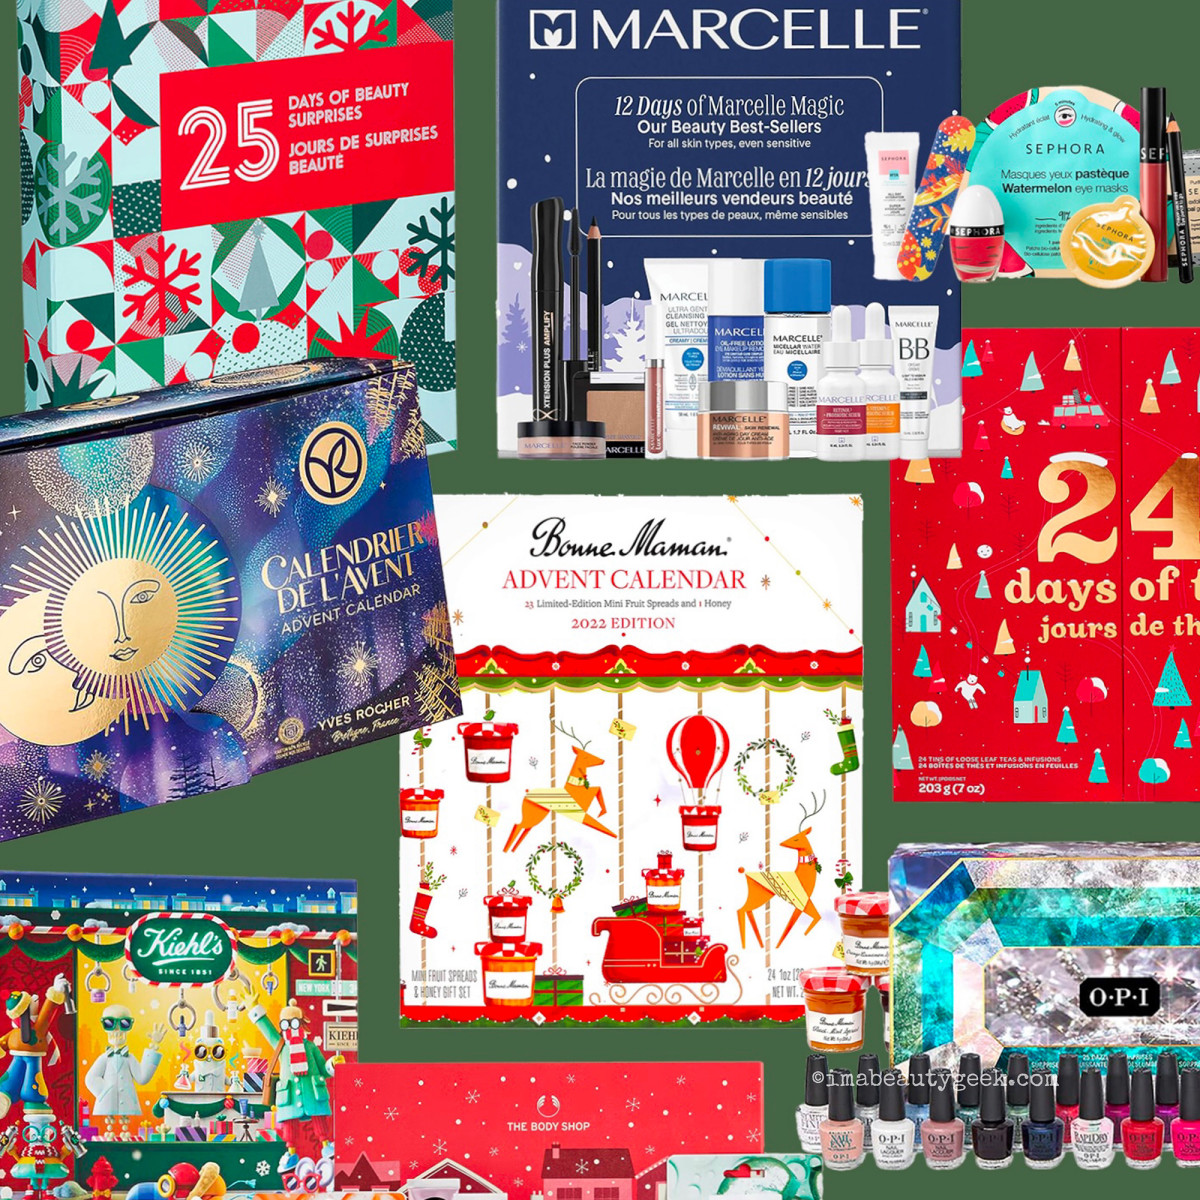 Some of these 2022 advent calendars will be easier than others to use for DIY surprise-a-day gifts. No judgement if you eat all the Bonne Maman jams (plus a jar of Bonne Maman honey) yourself.